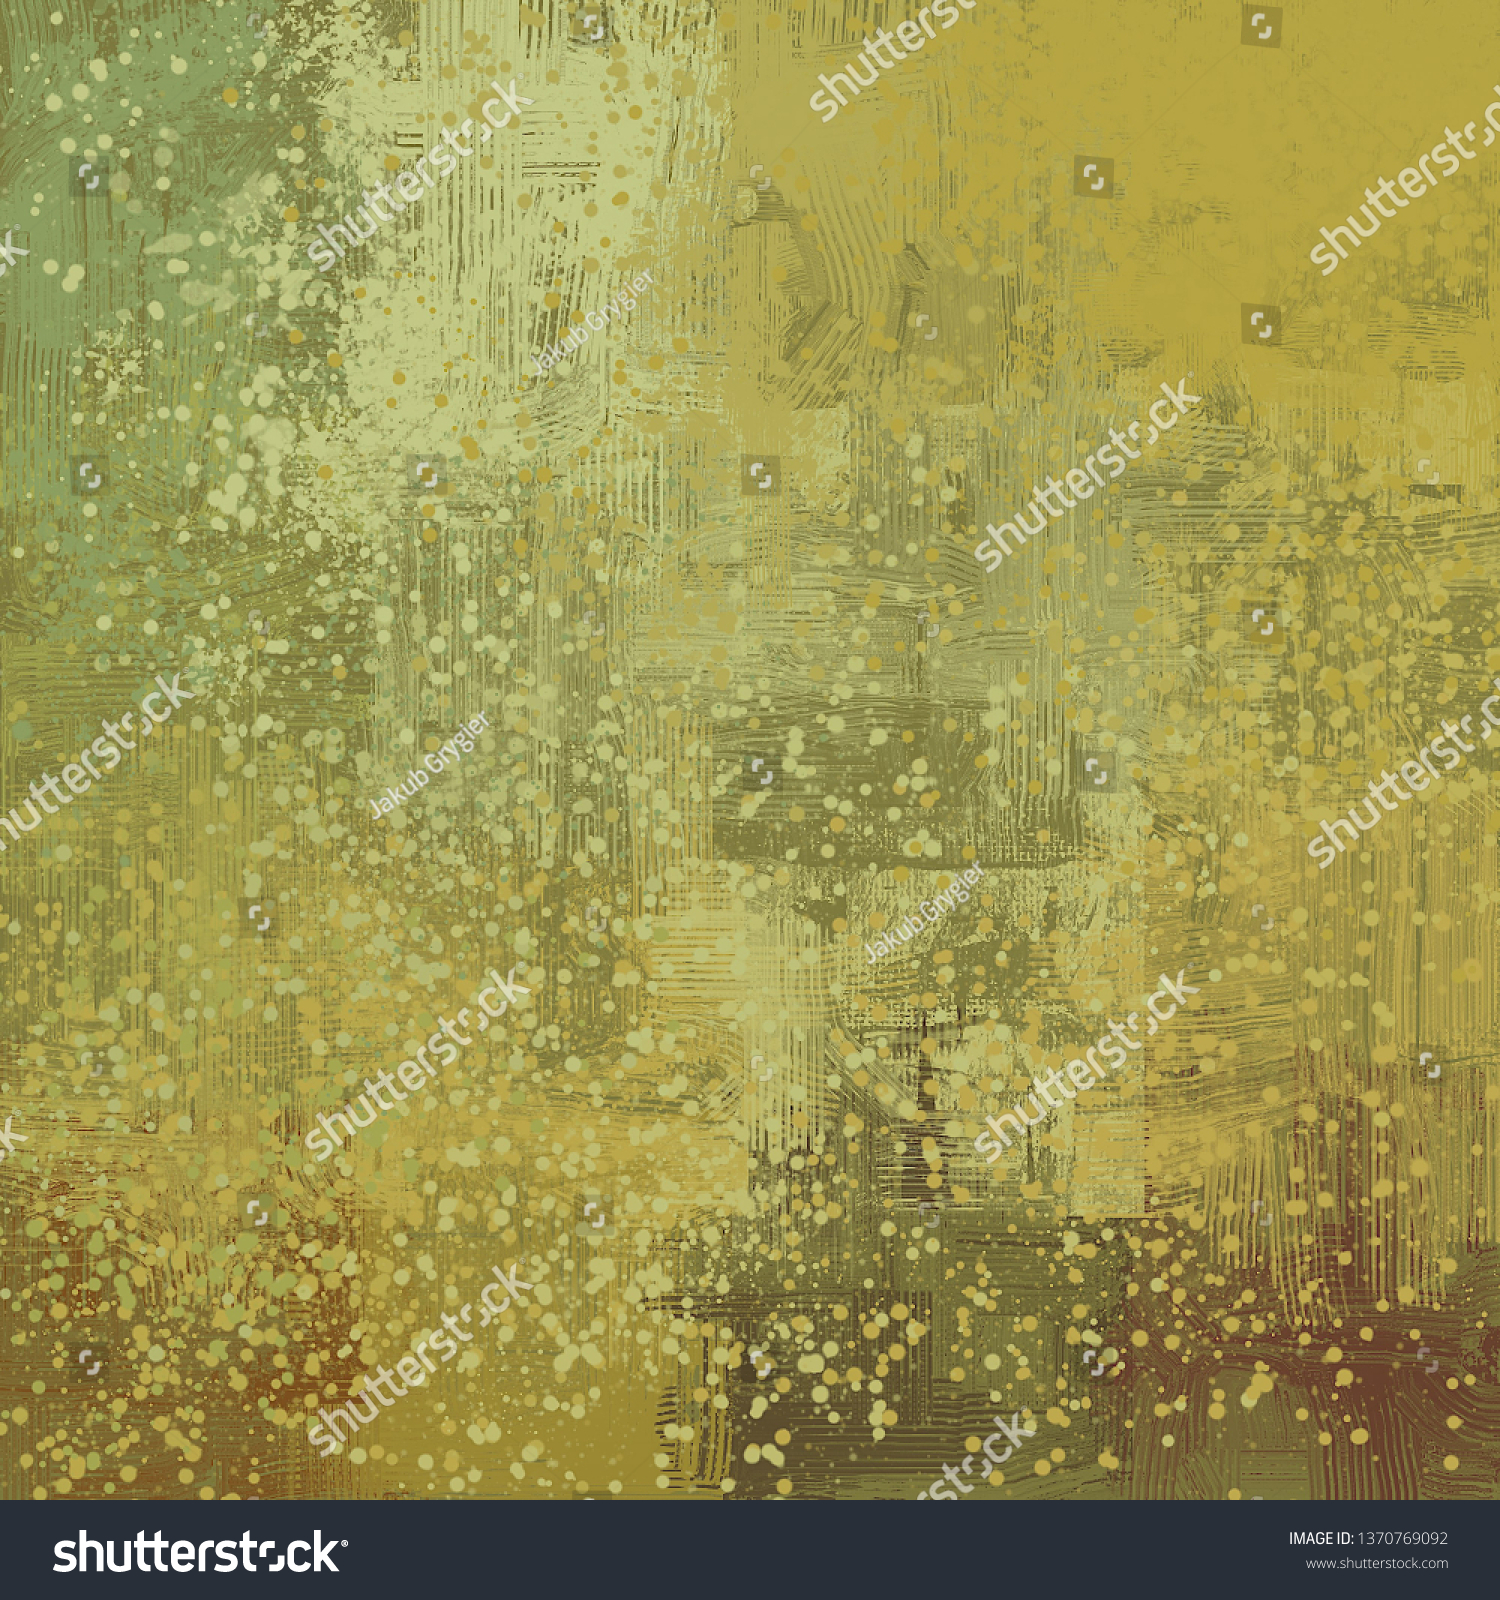 Abstract texture. 2d illustration. Expressive handmade oil painting on canvas. Wide brushstrokes. Modern art. Multi color backdrop. Contemporary brush. Artistic digital palette image. #1370769092